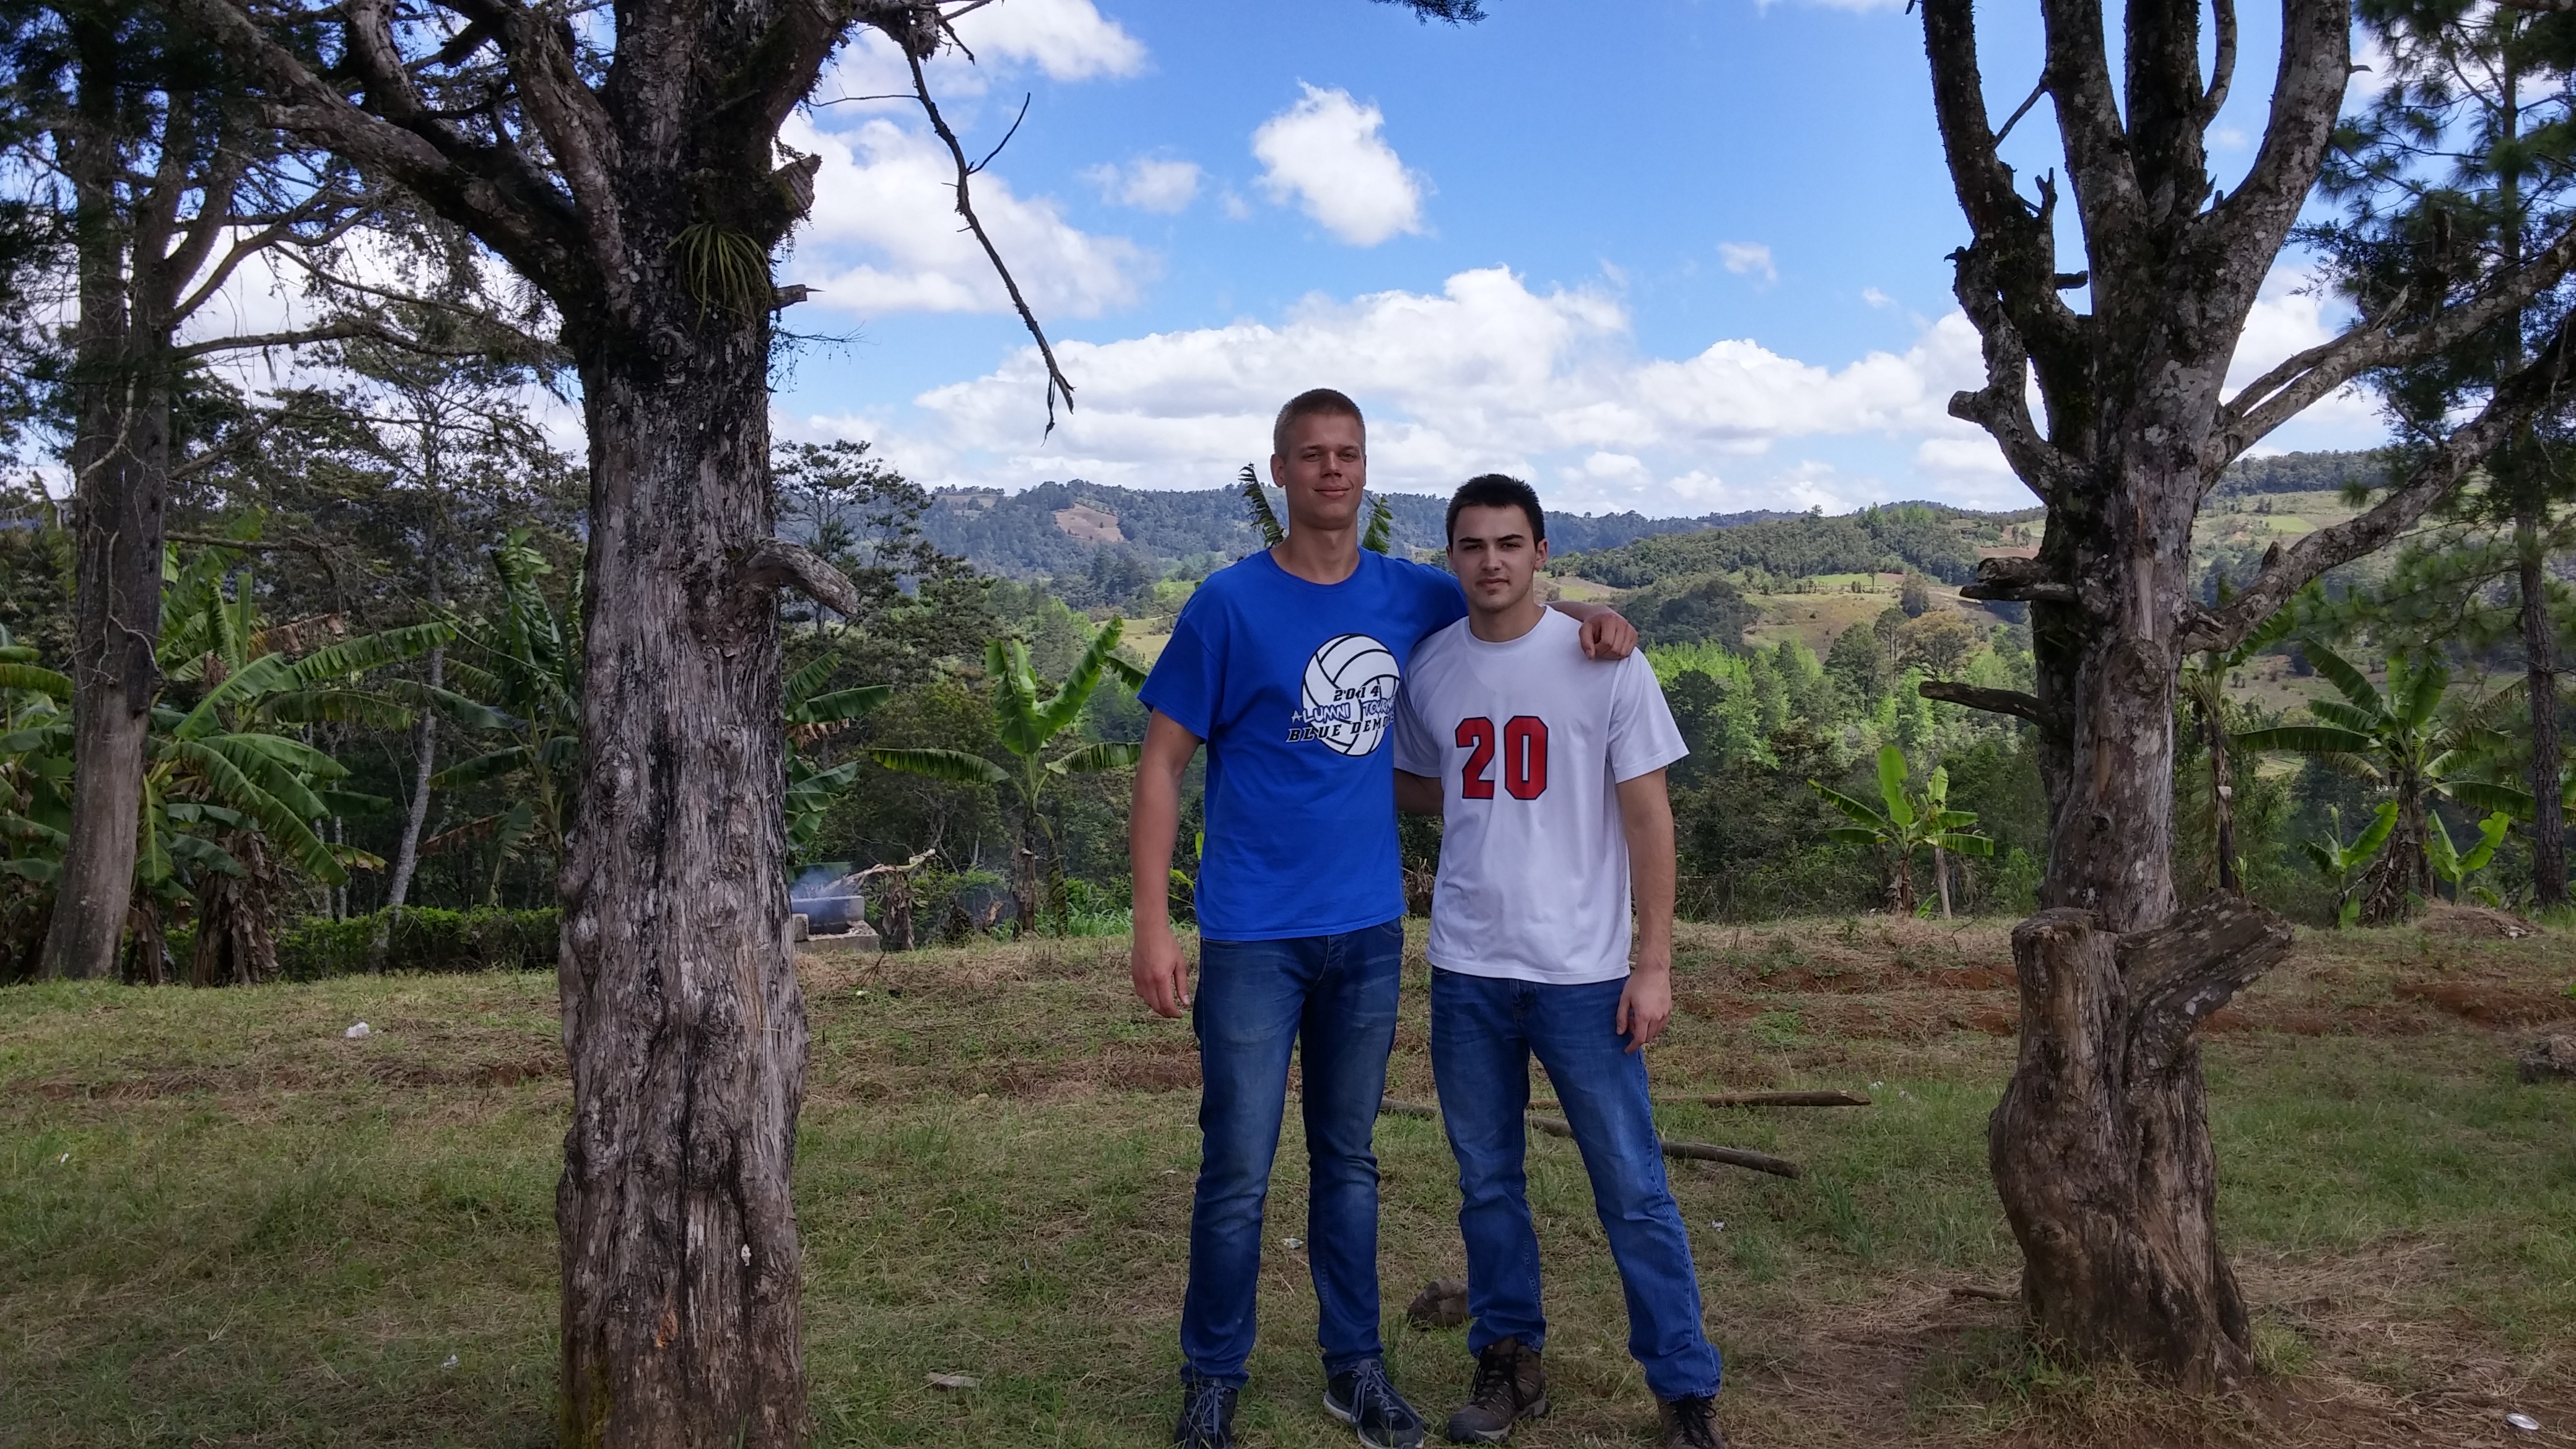 Joe and I overlooking the view at the school in El Cacao.